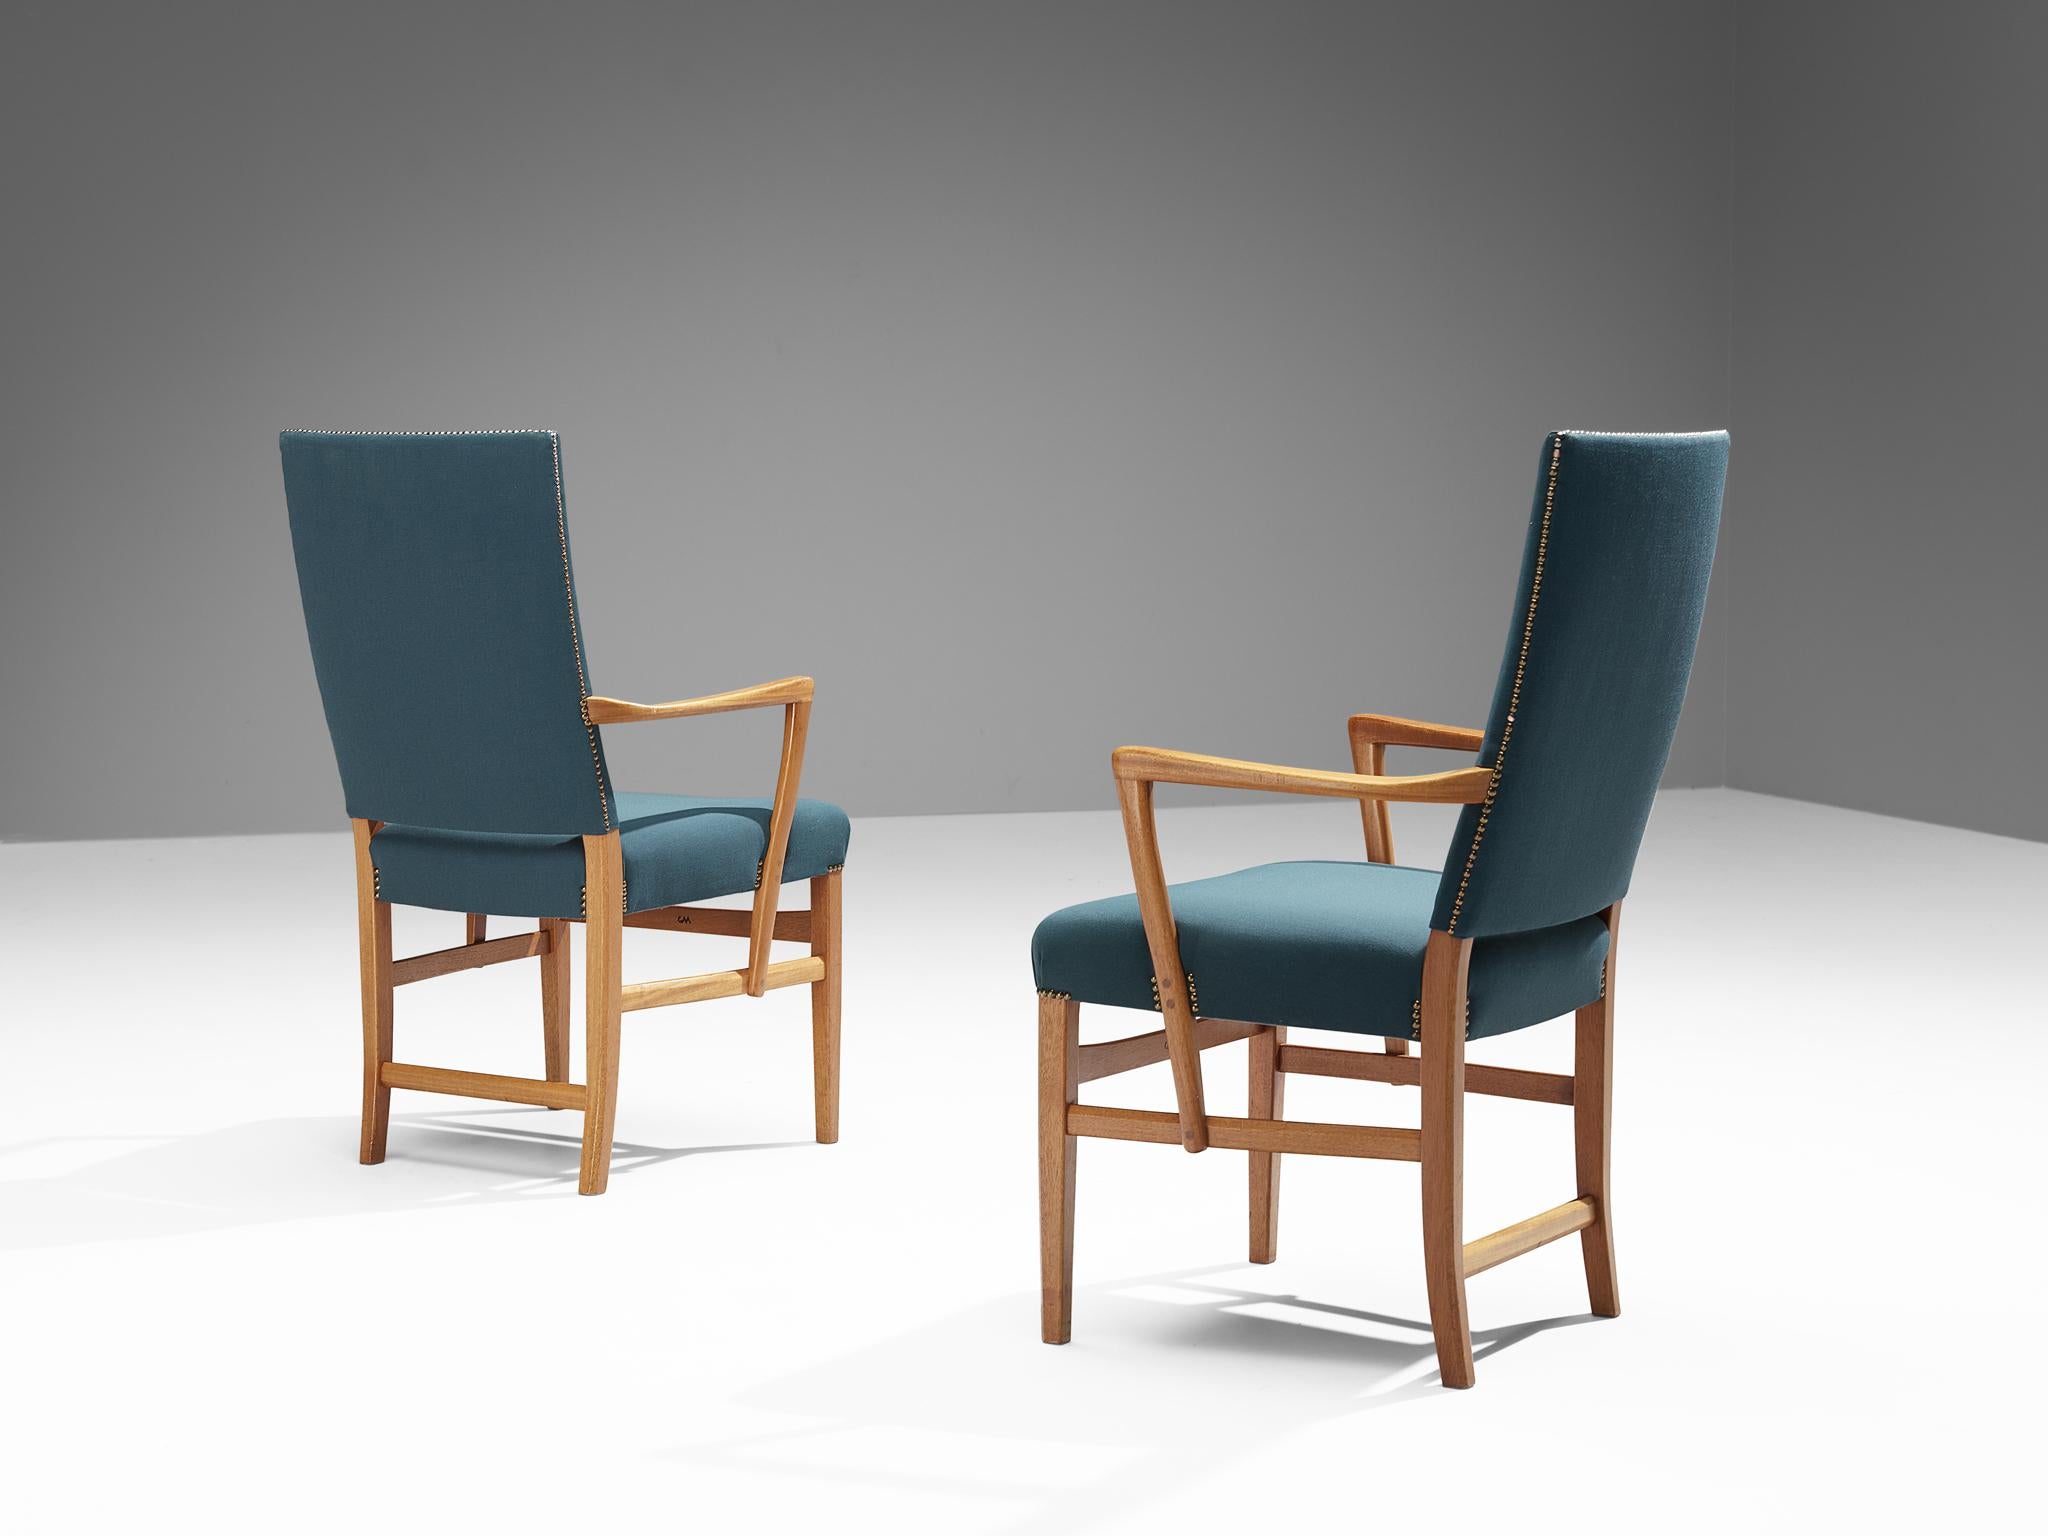 Carl Malmsten, pair of dining chairs, teak, fabric, brass, Sweden, circa 1970

These high back armchairs are designed by the Swedish designer Carl Malmsten (1888-1972). These elegant armchairs are a prime example of Scandinavian Modern design